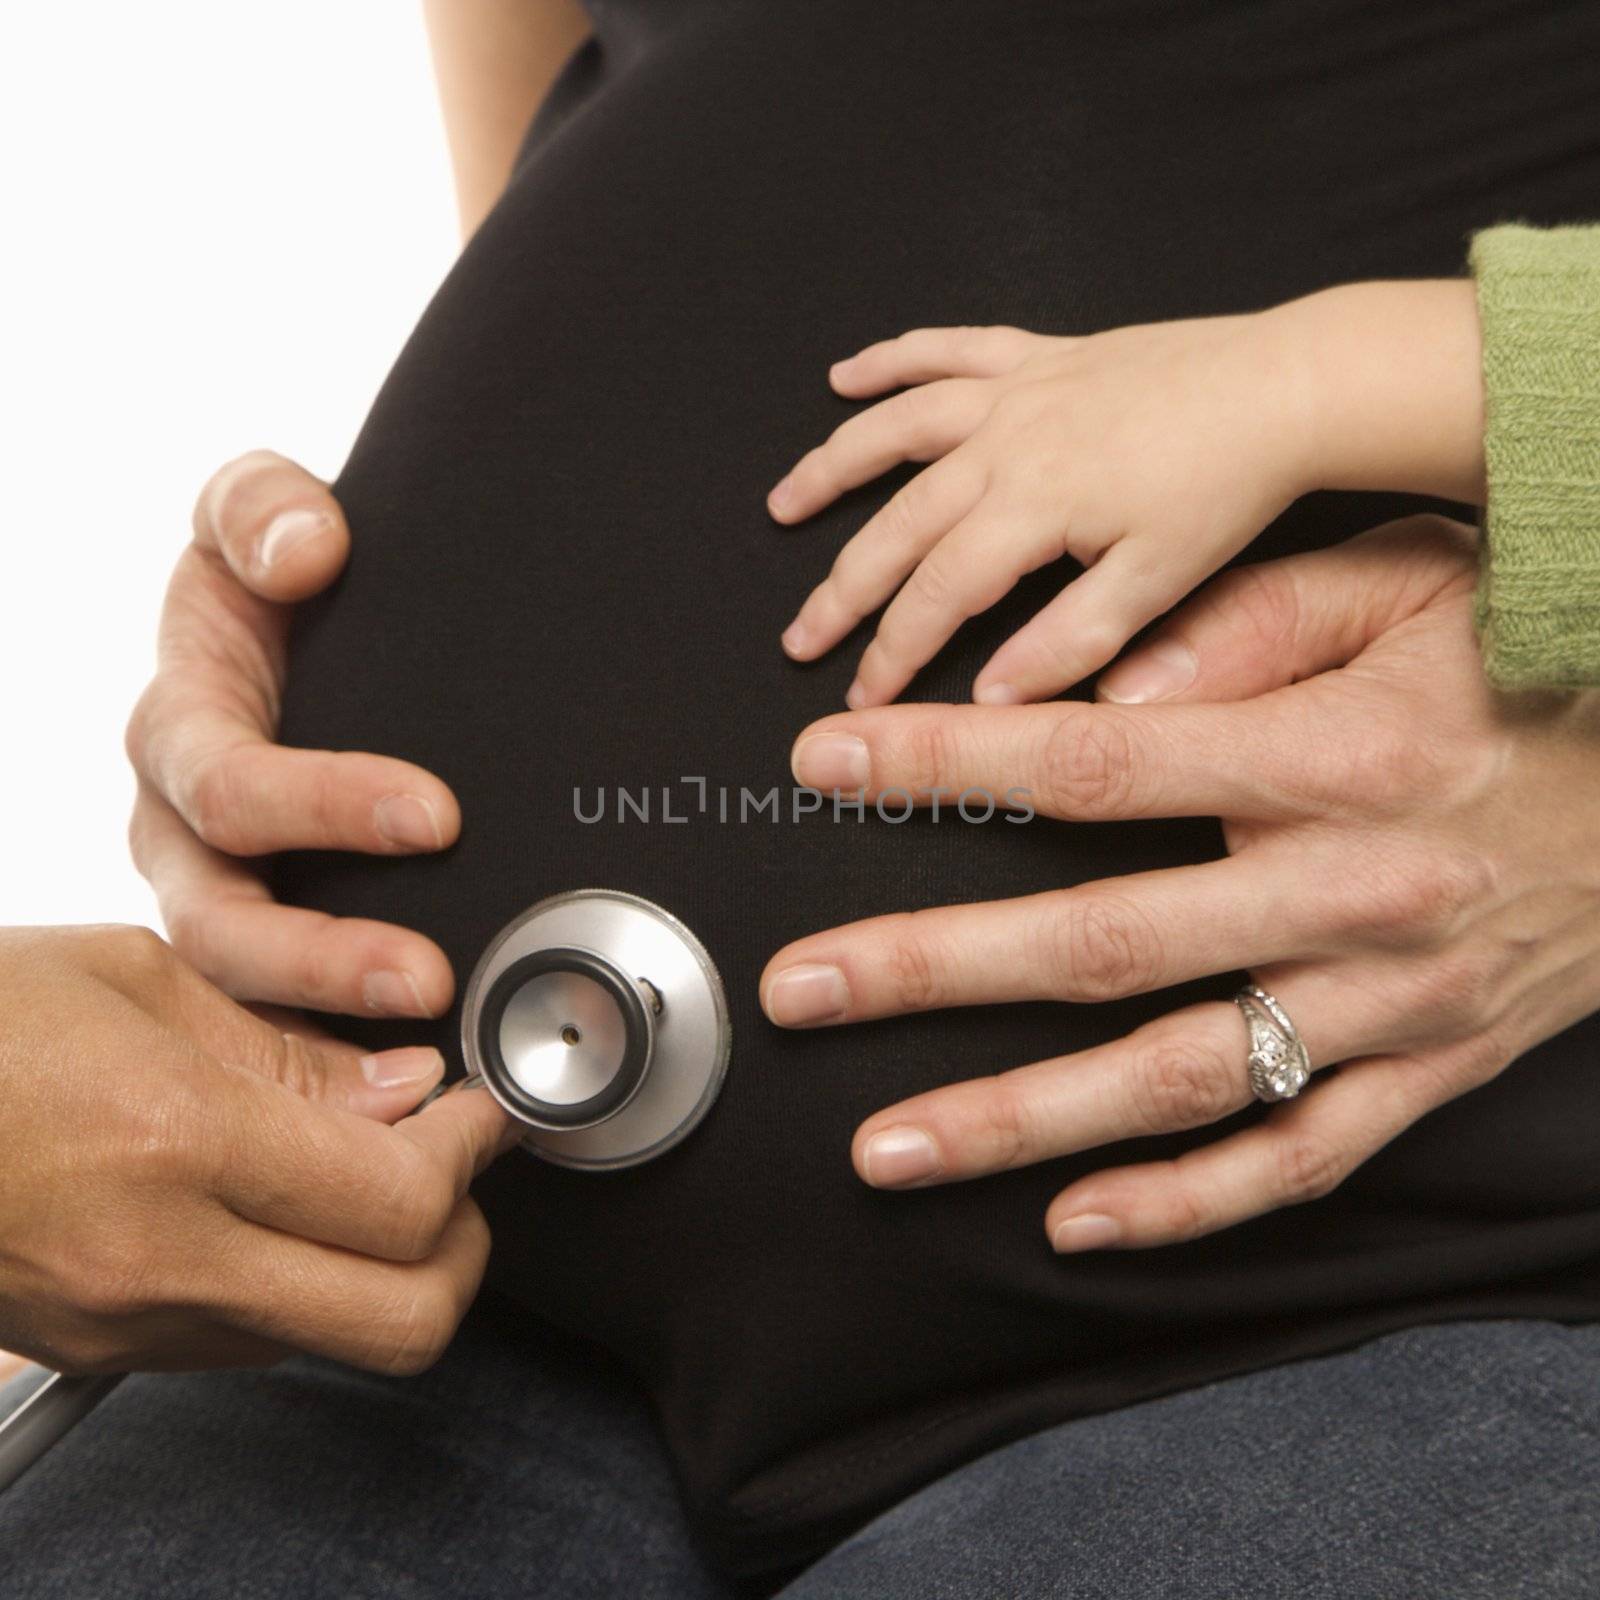 Stethoscope on pregnant belly. by iofoto